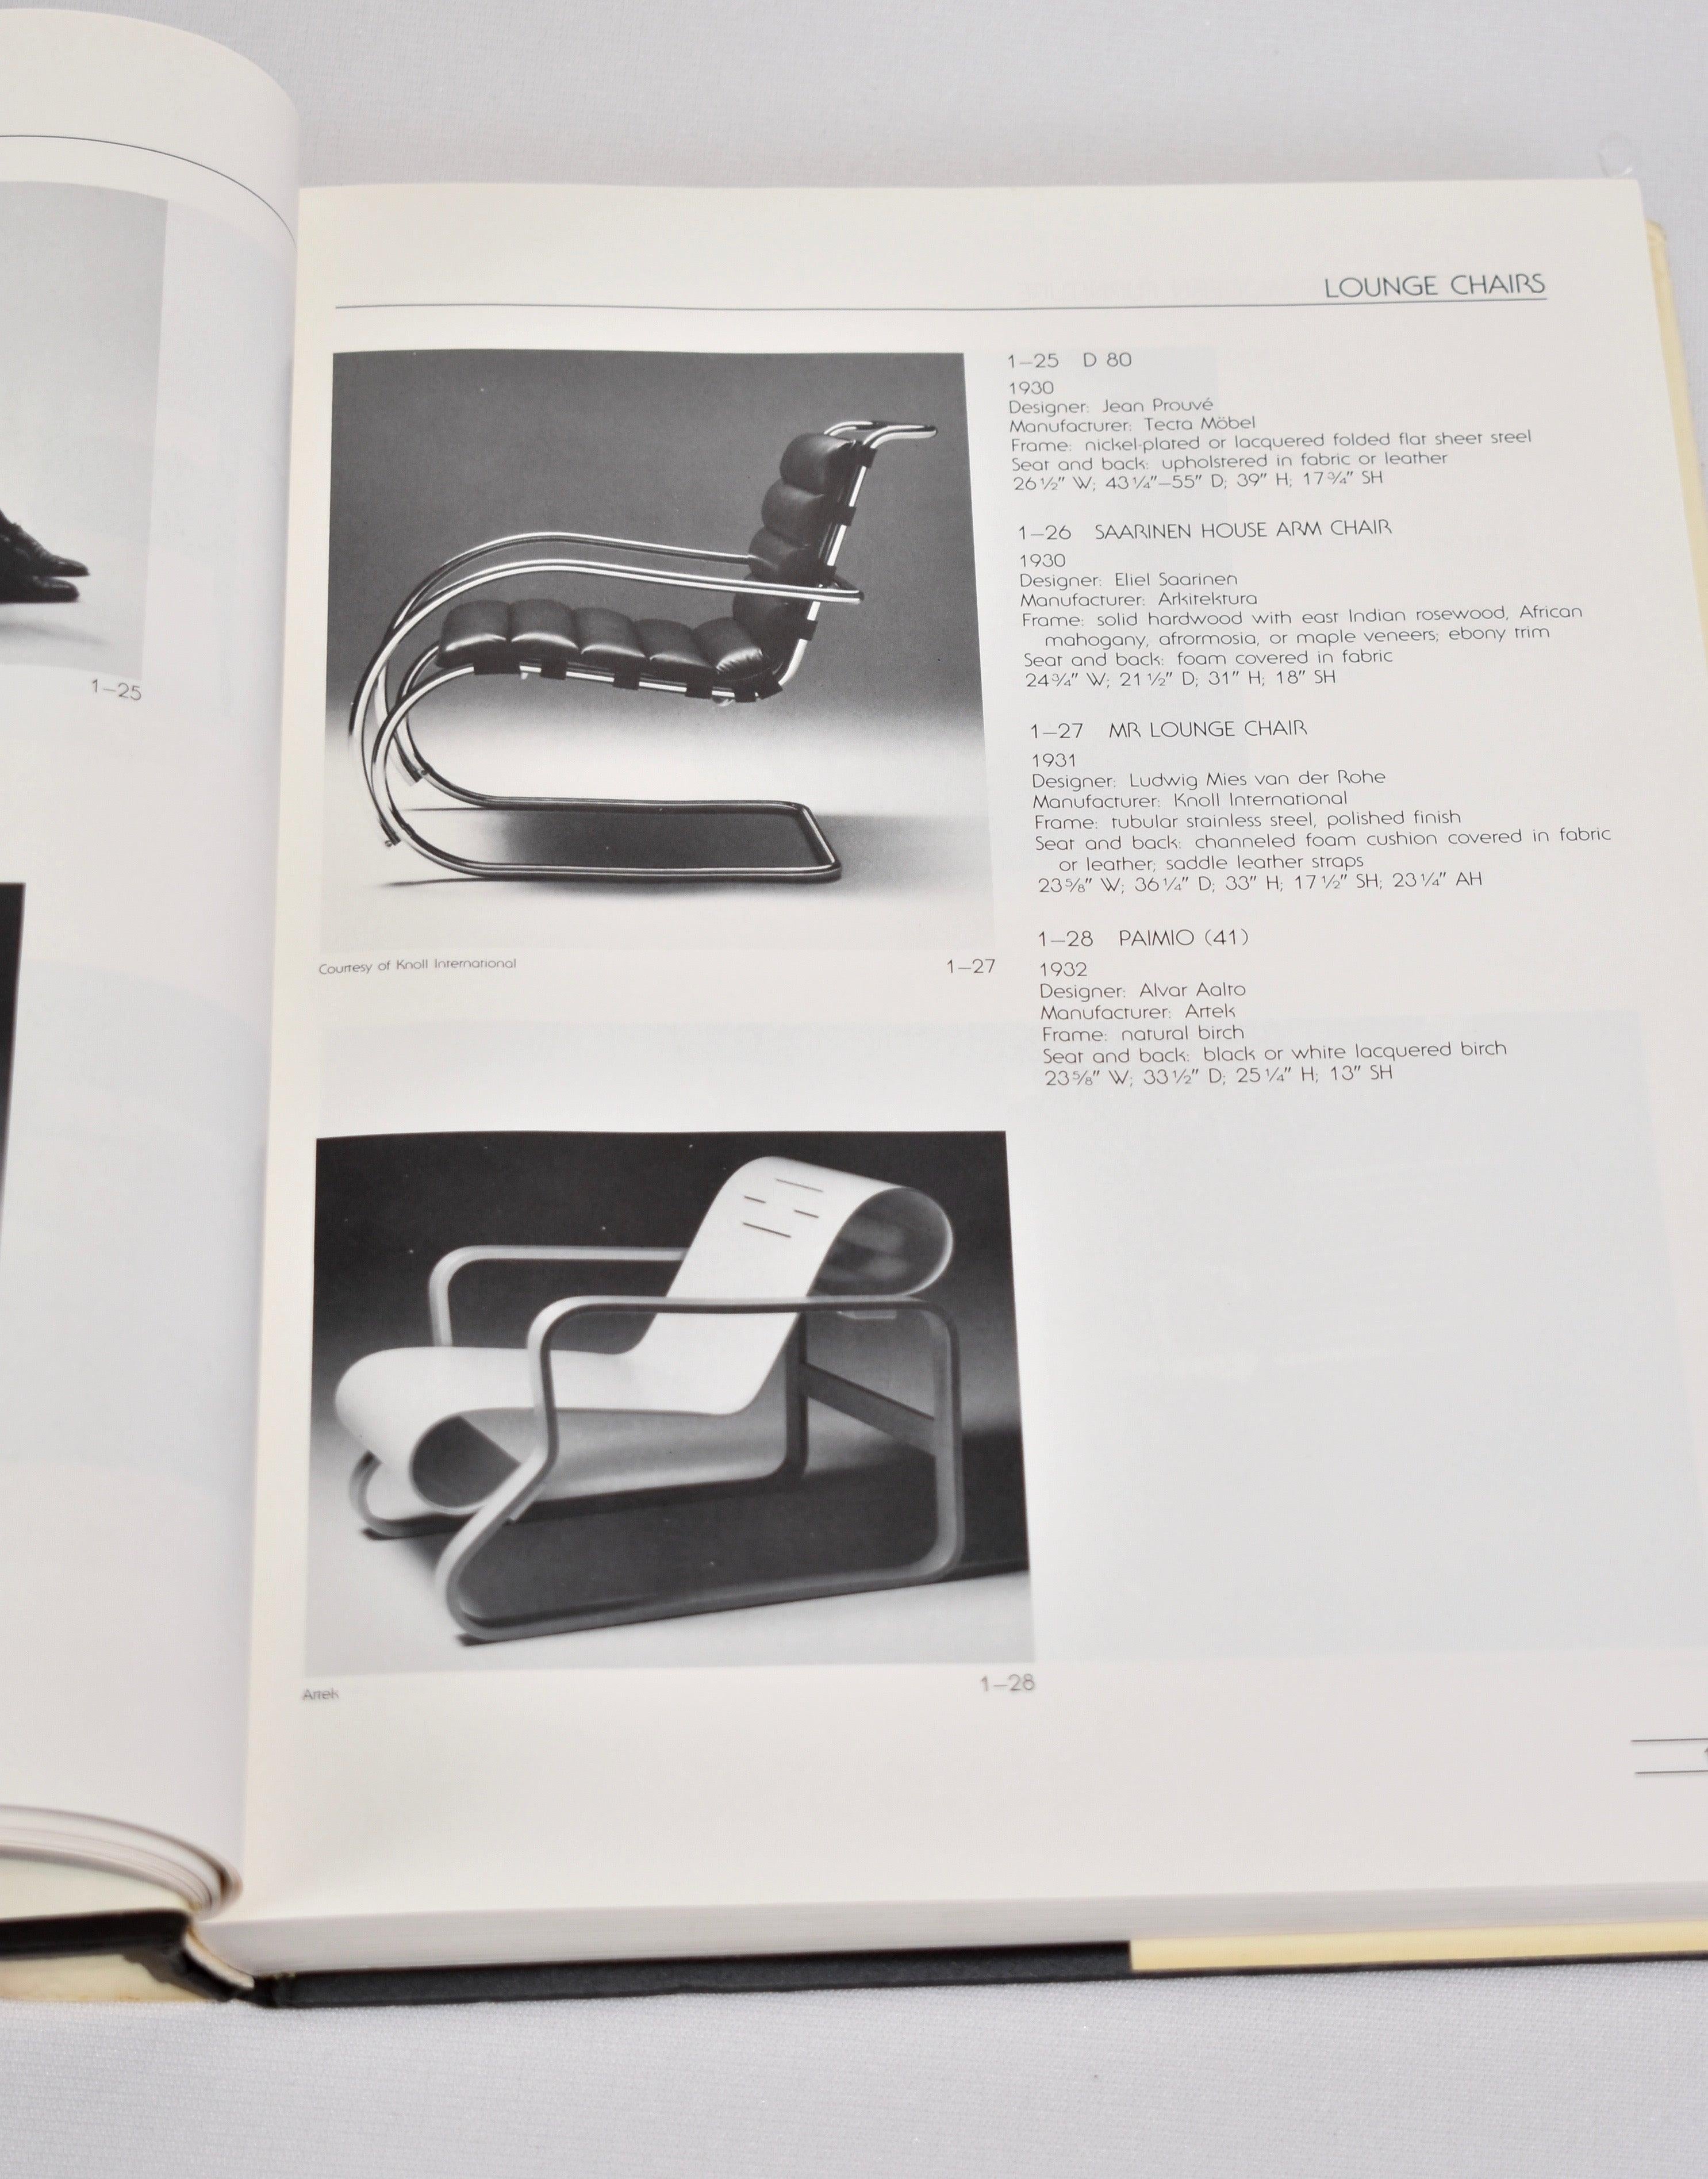 Hardback coffee table book sourcing modern furniture design. By Jerryll Habegger and Joseph H. Osman, published by 1989. 1st edition, 470 pages.

